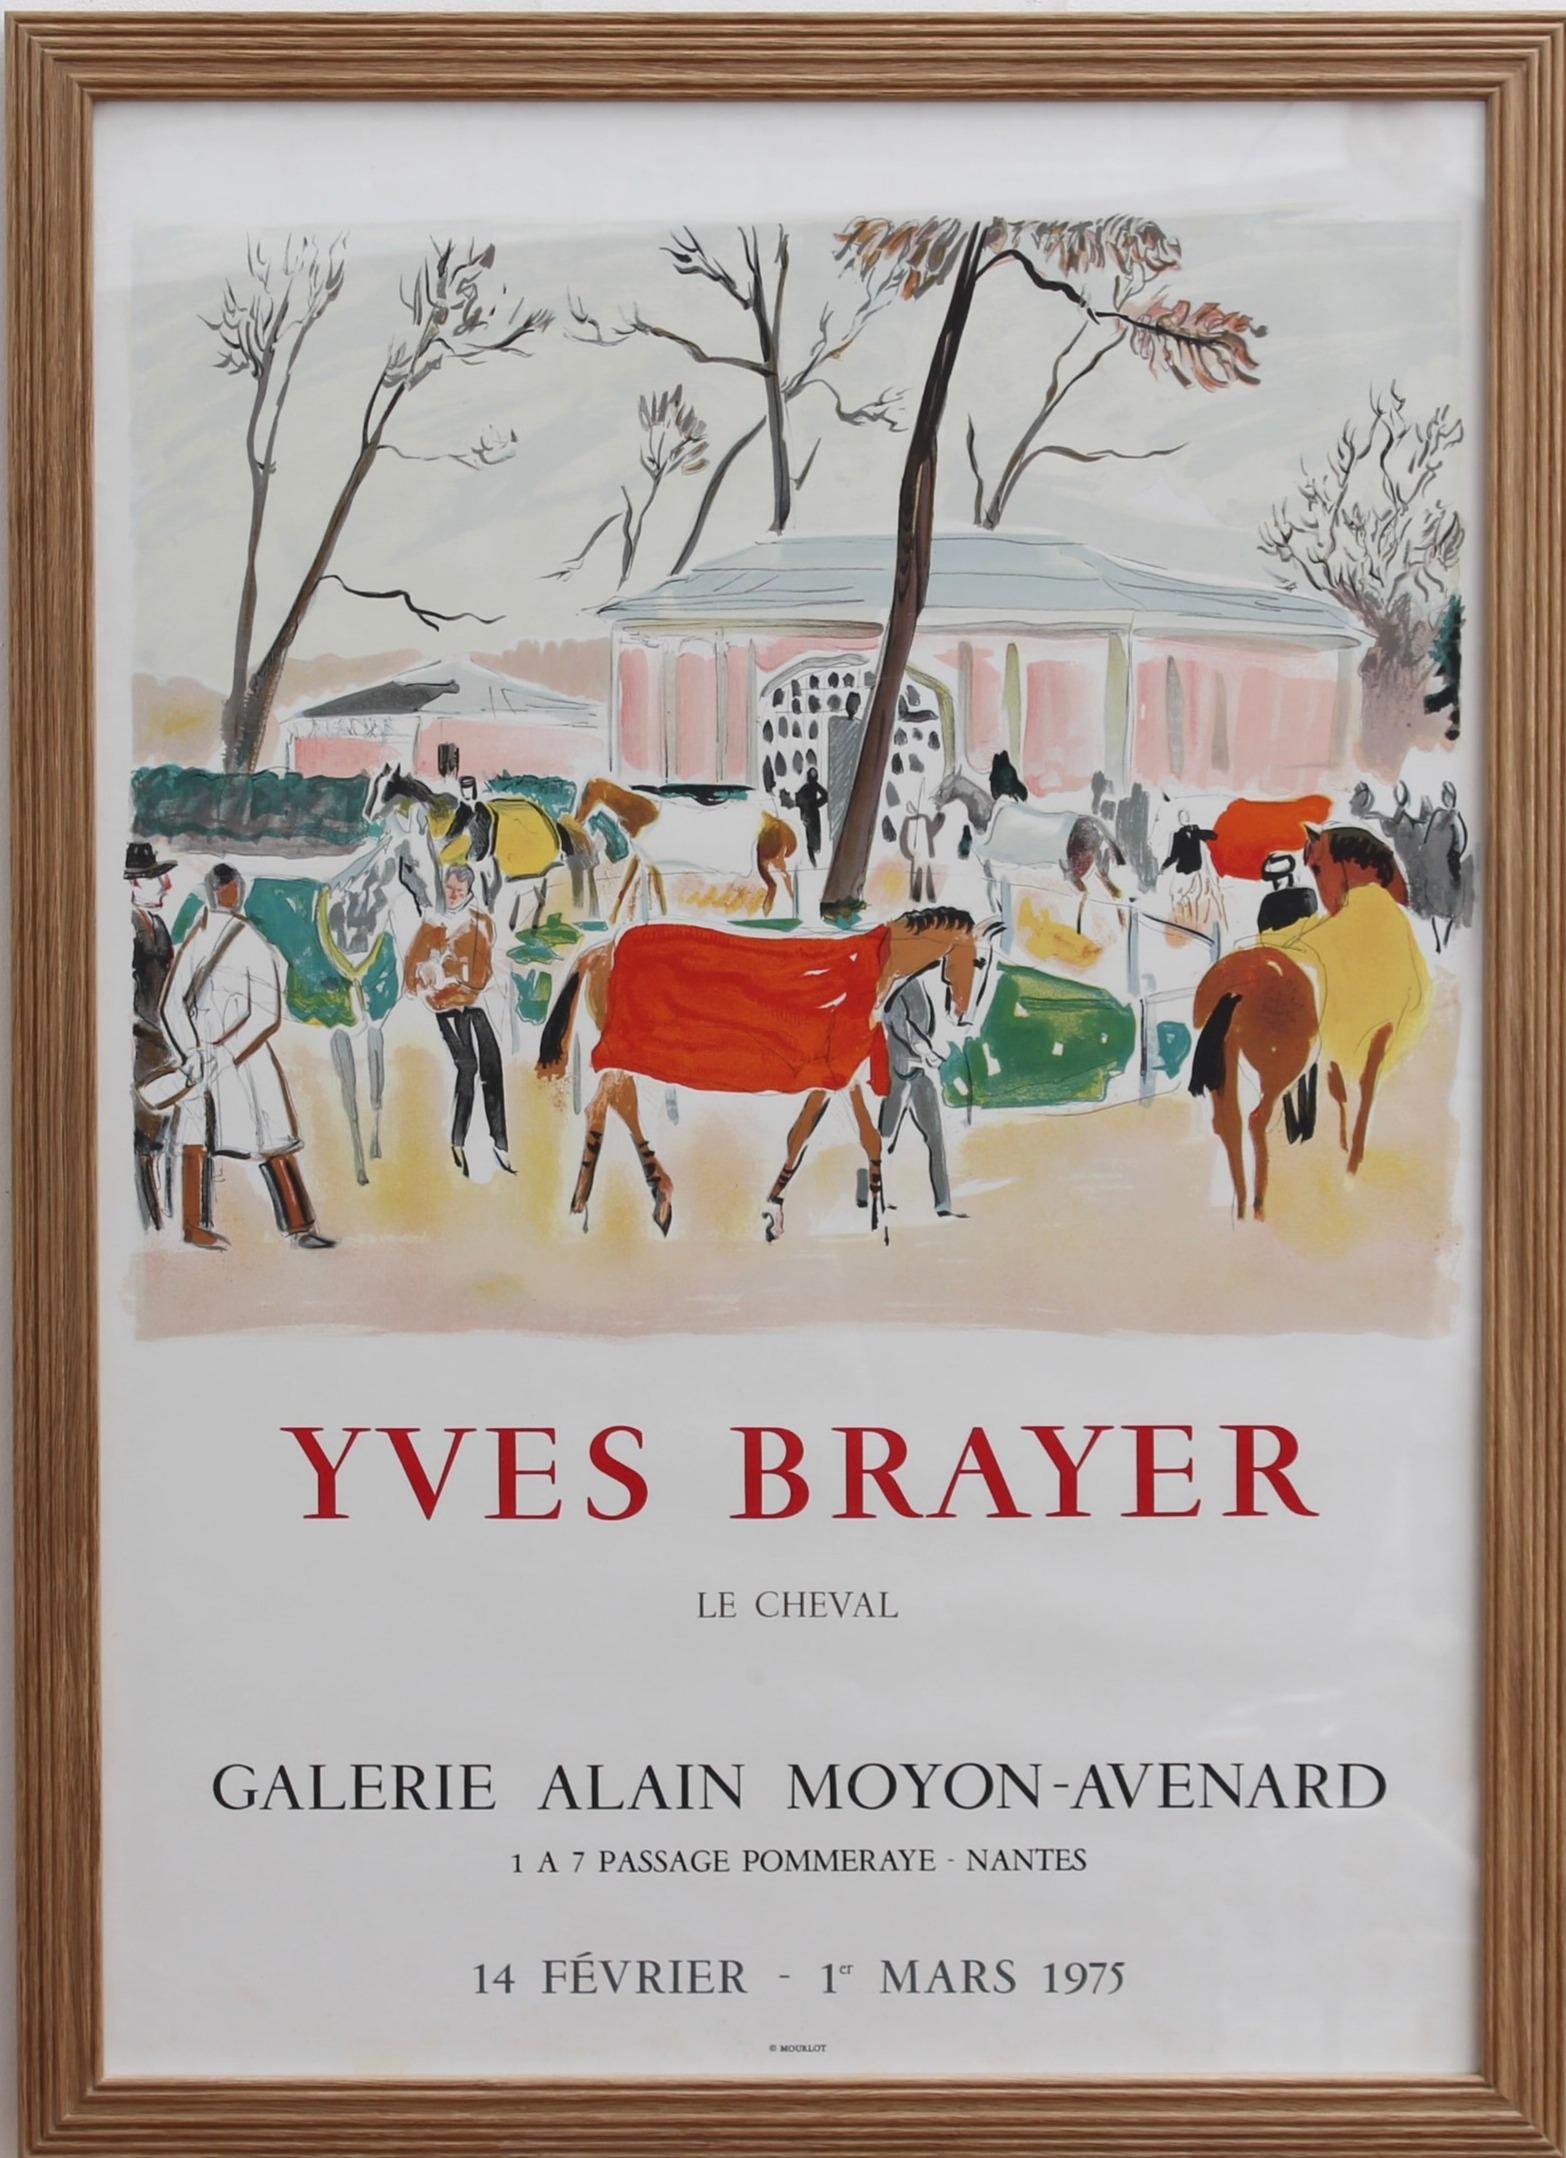 French Vintage Exhibition Poster for Yves Brayer (1975). Newly framed, the poster announces an exhibition of the works of Yves Brayer at the Galerie Alain Moyon-Avenard in Nantes, France. Discovered in the South of France, this gallery holds several